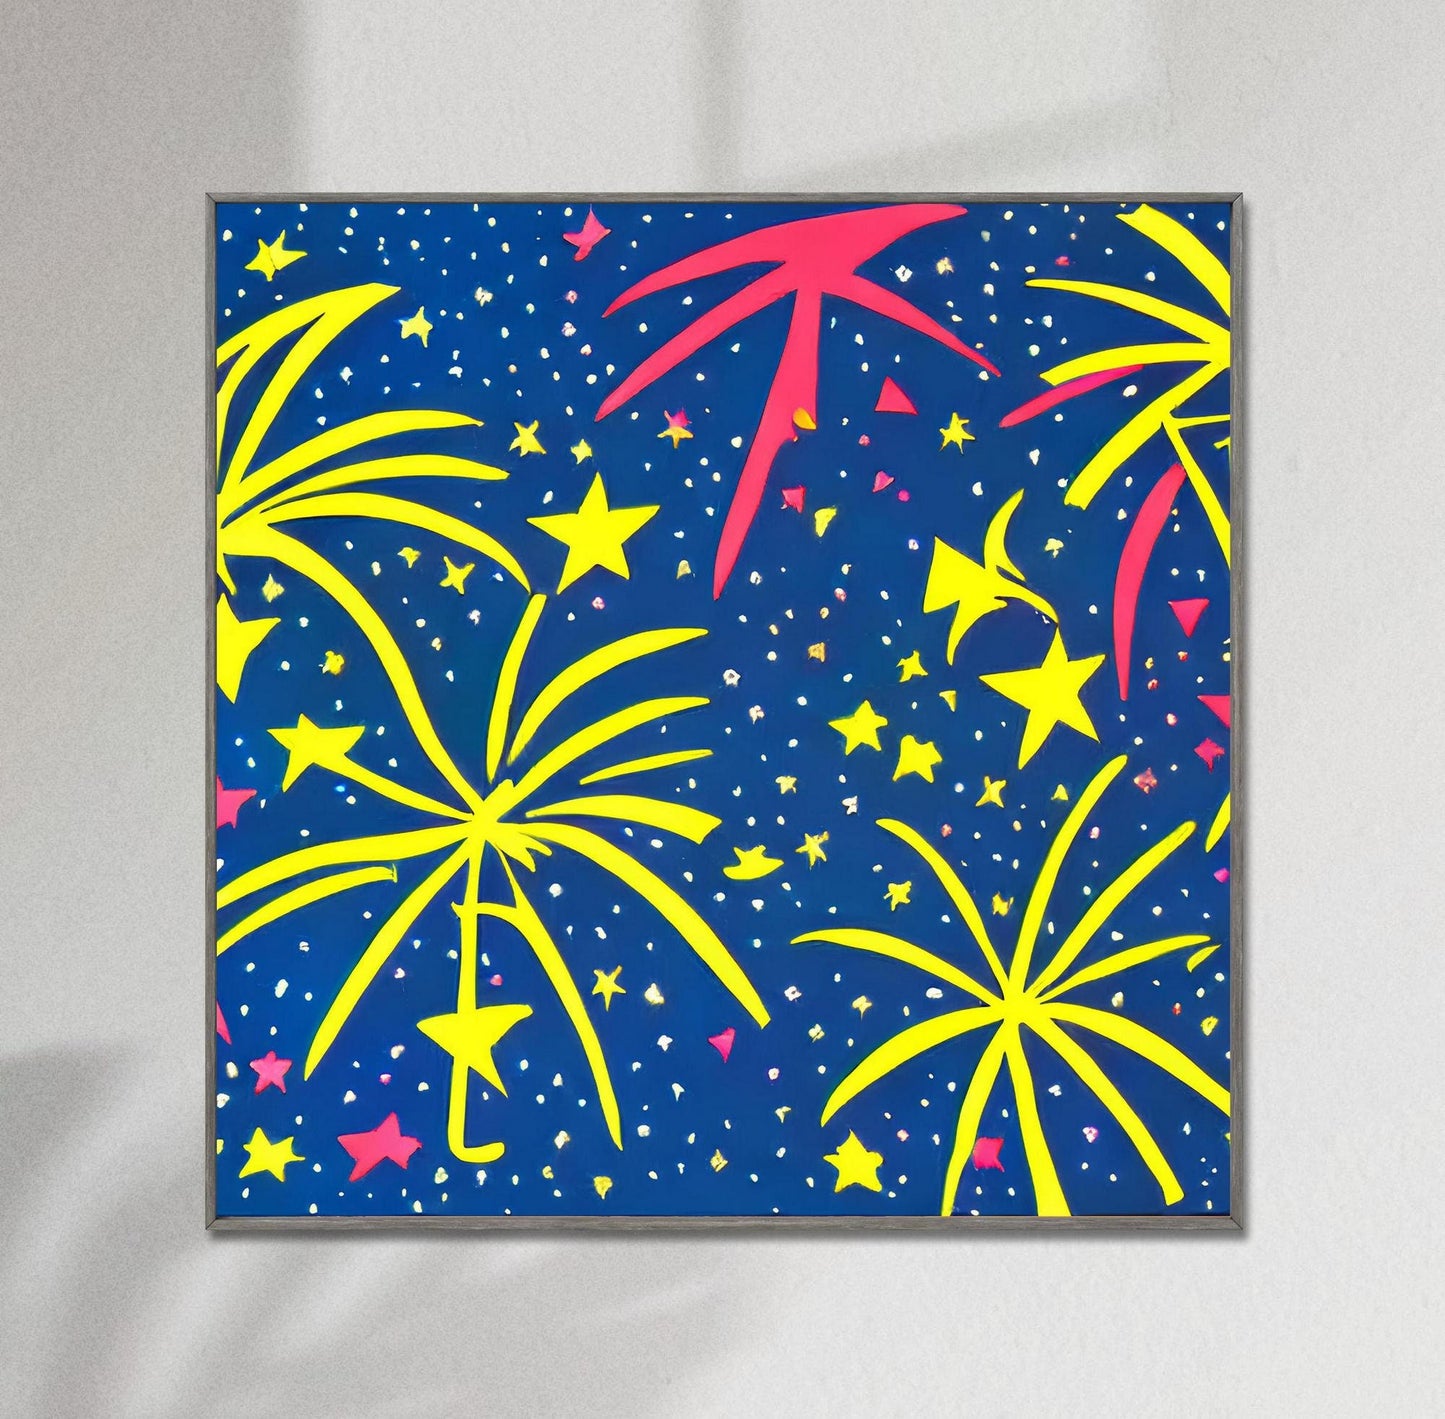 New Year'S Eve Fireworks In The Air Canvas Print, Posters, Abstract Print, Living Room Wall Art, Framed Canvas, Print From Original Painting